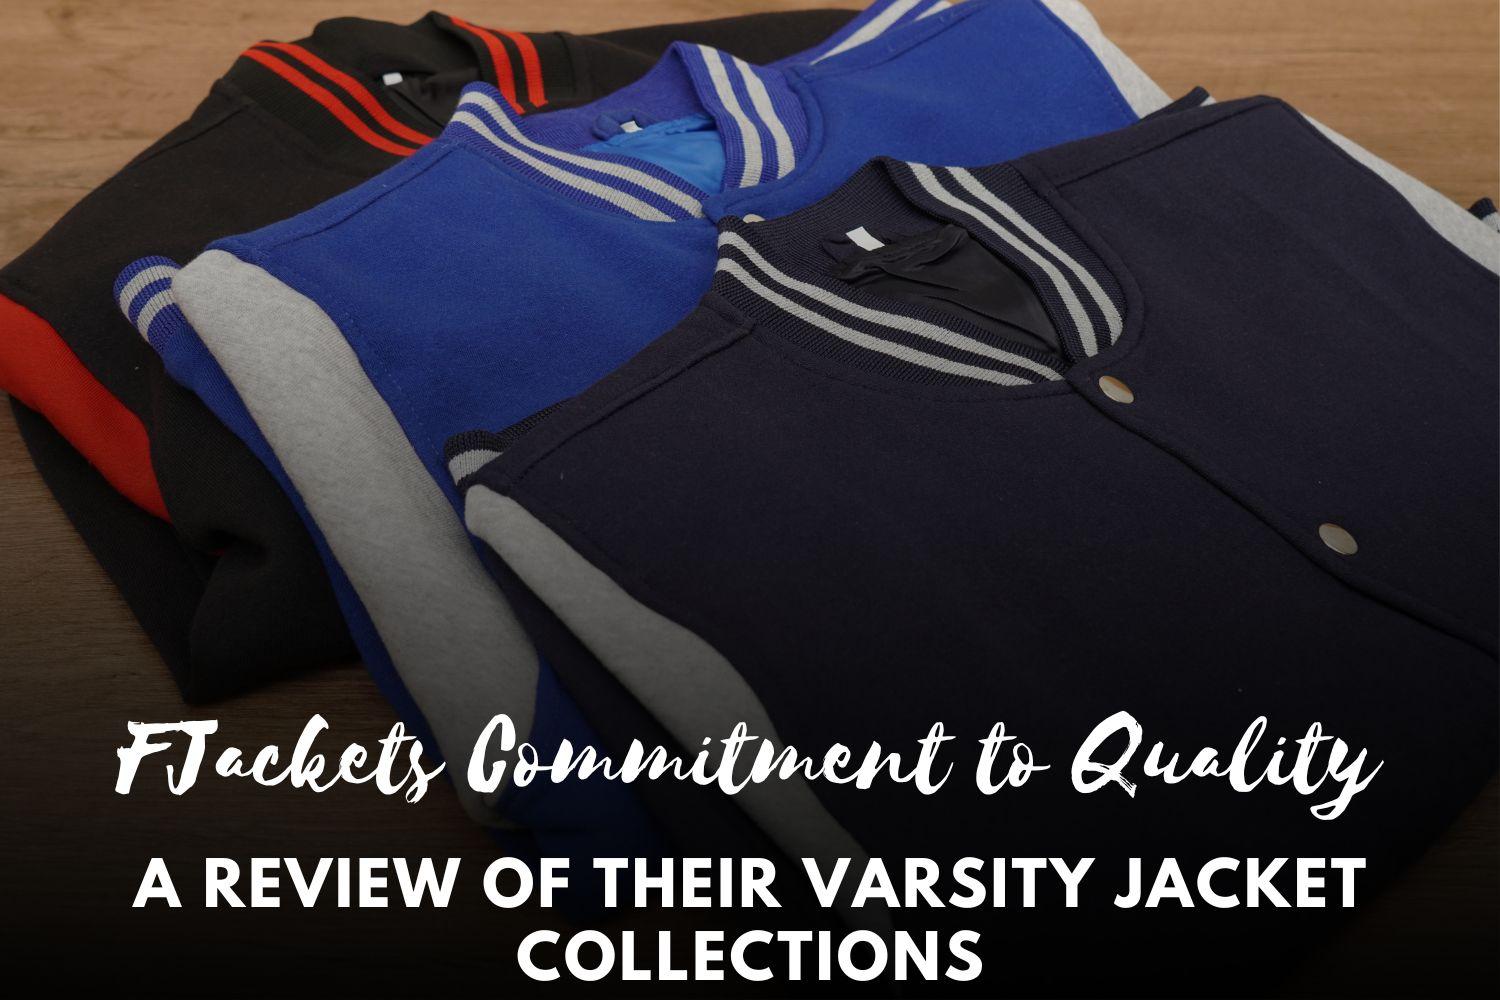 FJackets Commitment to Quality: A Review of Their Varsity Jacket Collections